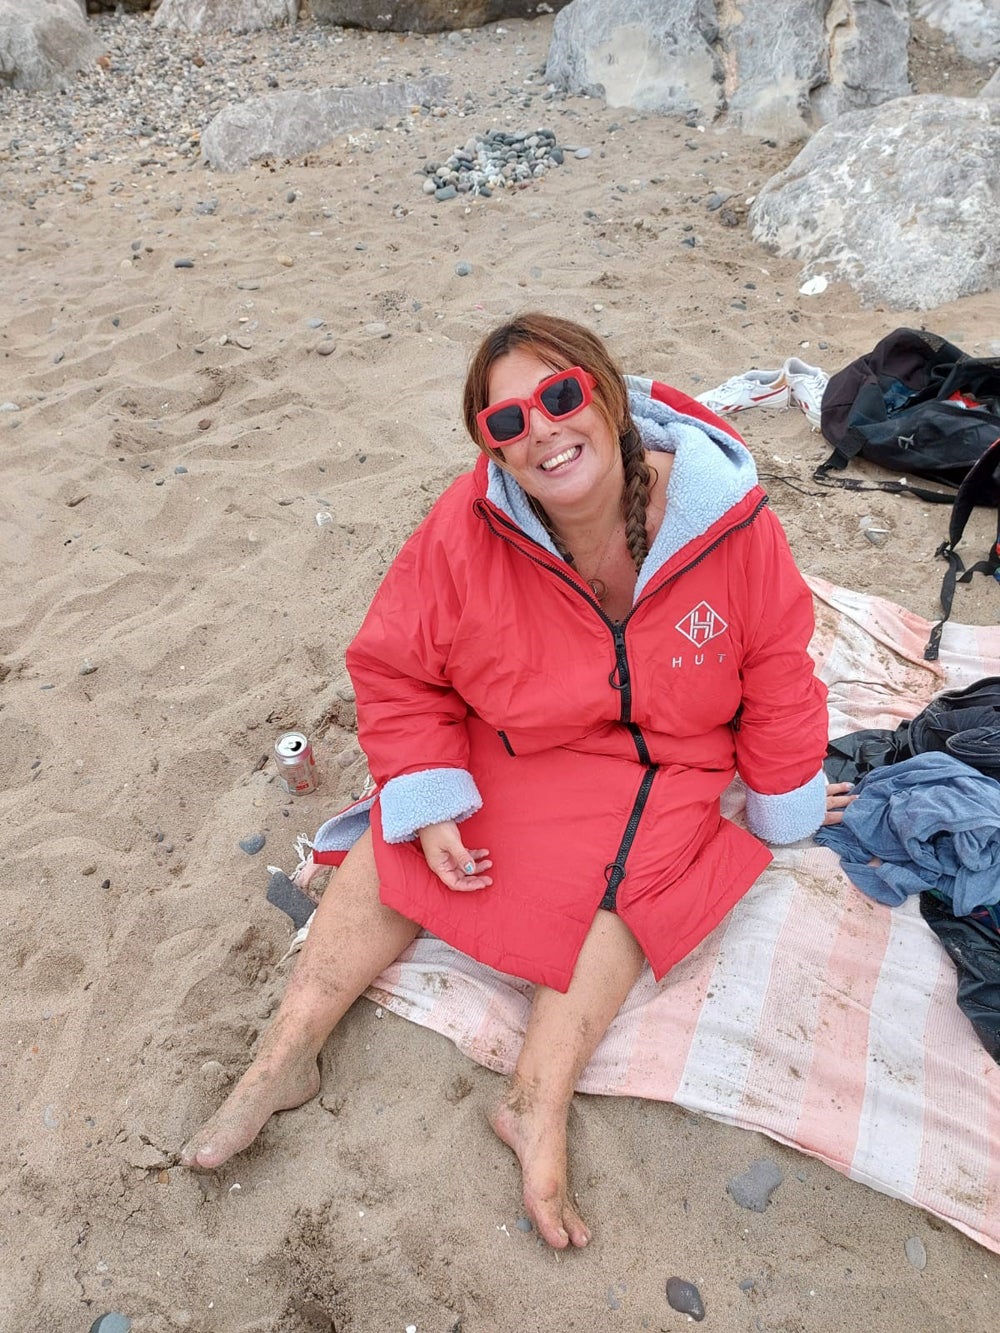 Claire Keable, 48, wrapped up after a chilly swim earlier this year (Collect/PA Real Life)